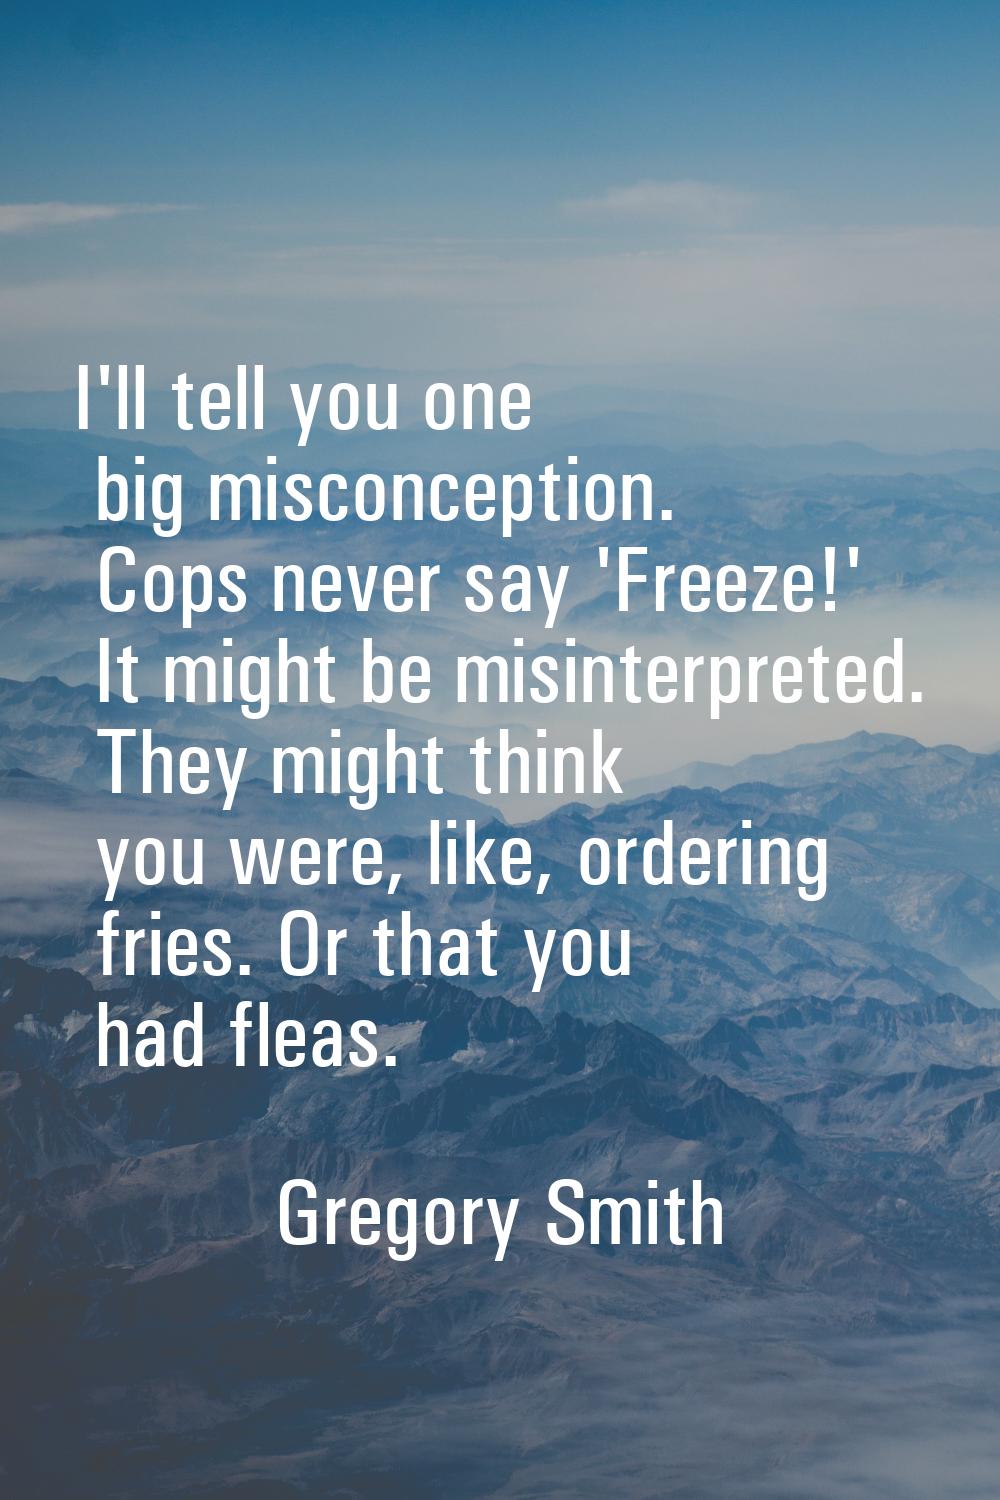 I'll tell you one big misconception. Cops never say 'Freeze!' It might be misinterpreted. They migh